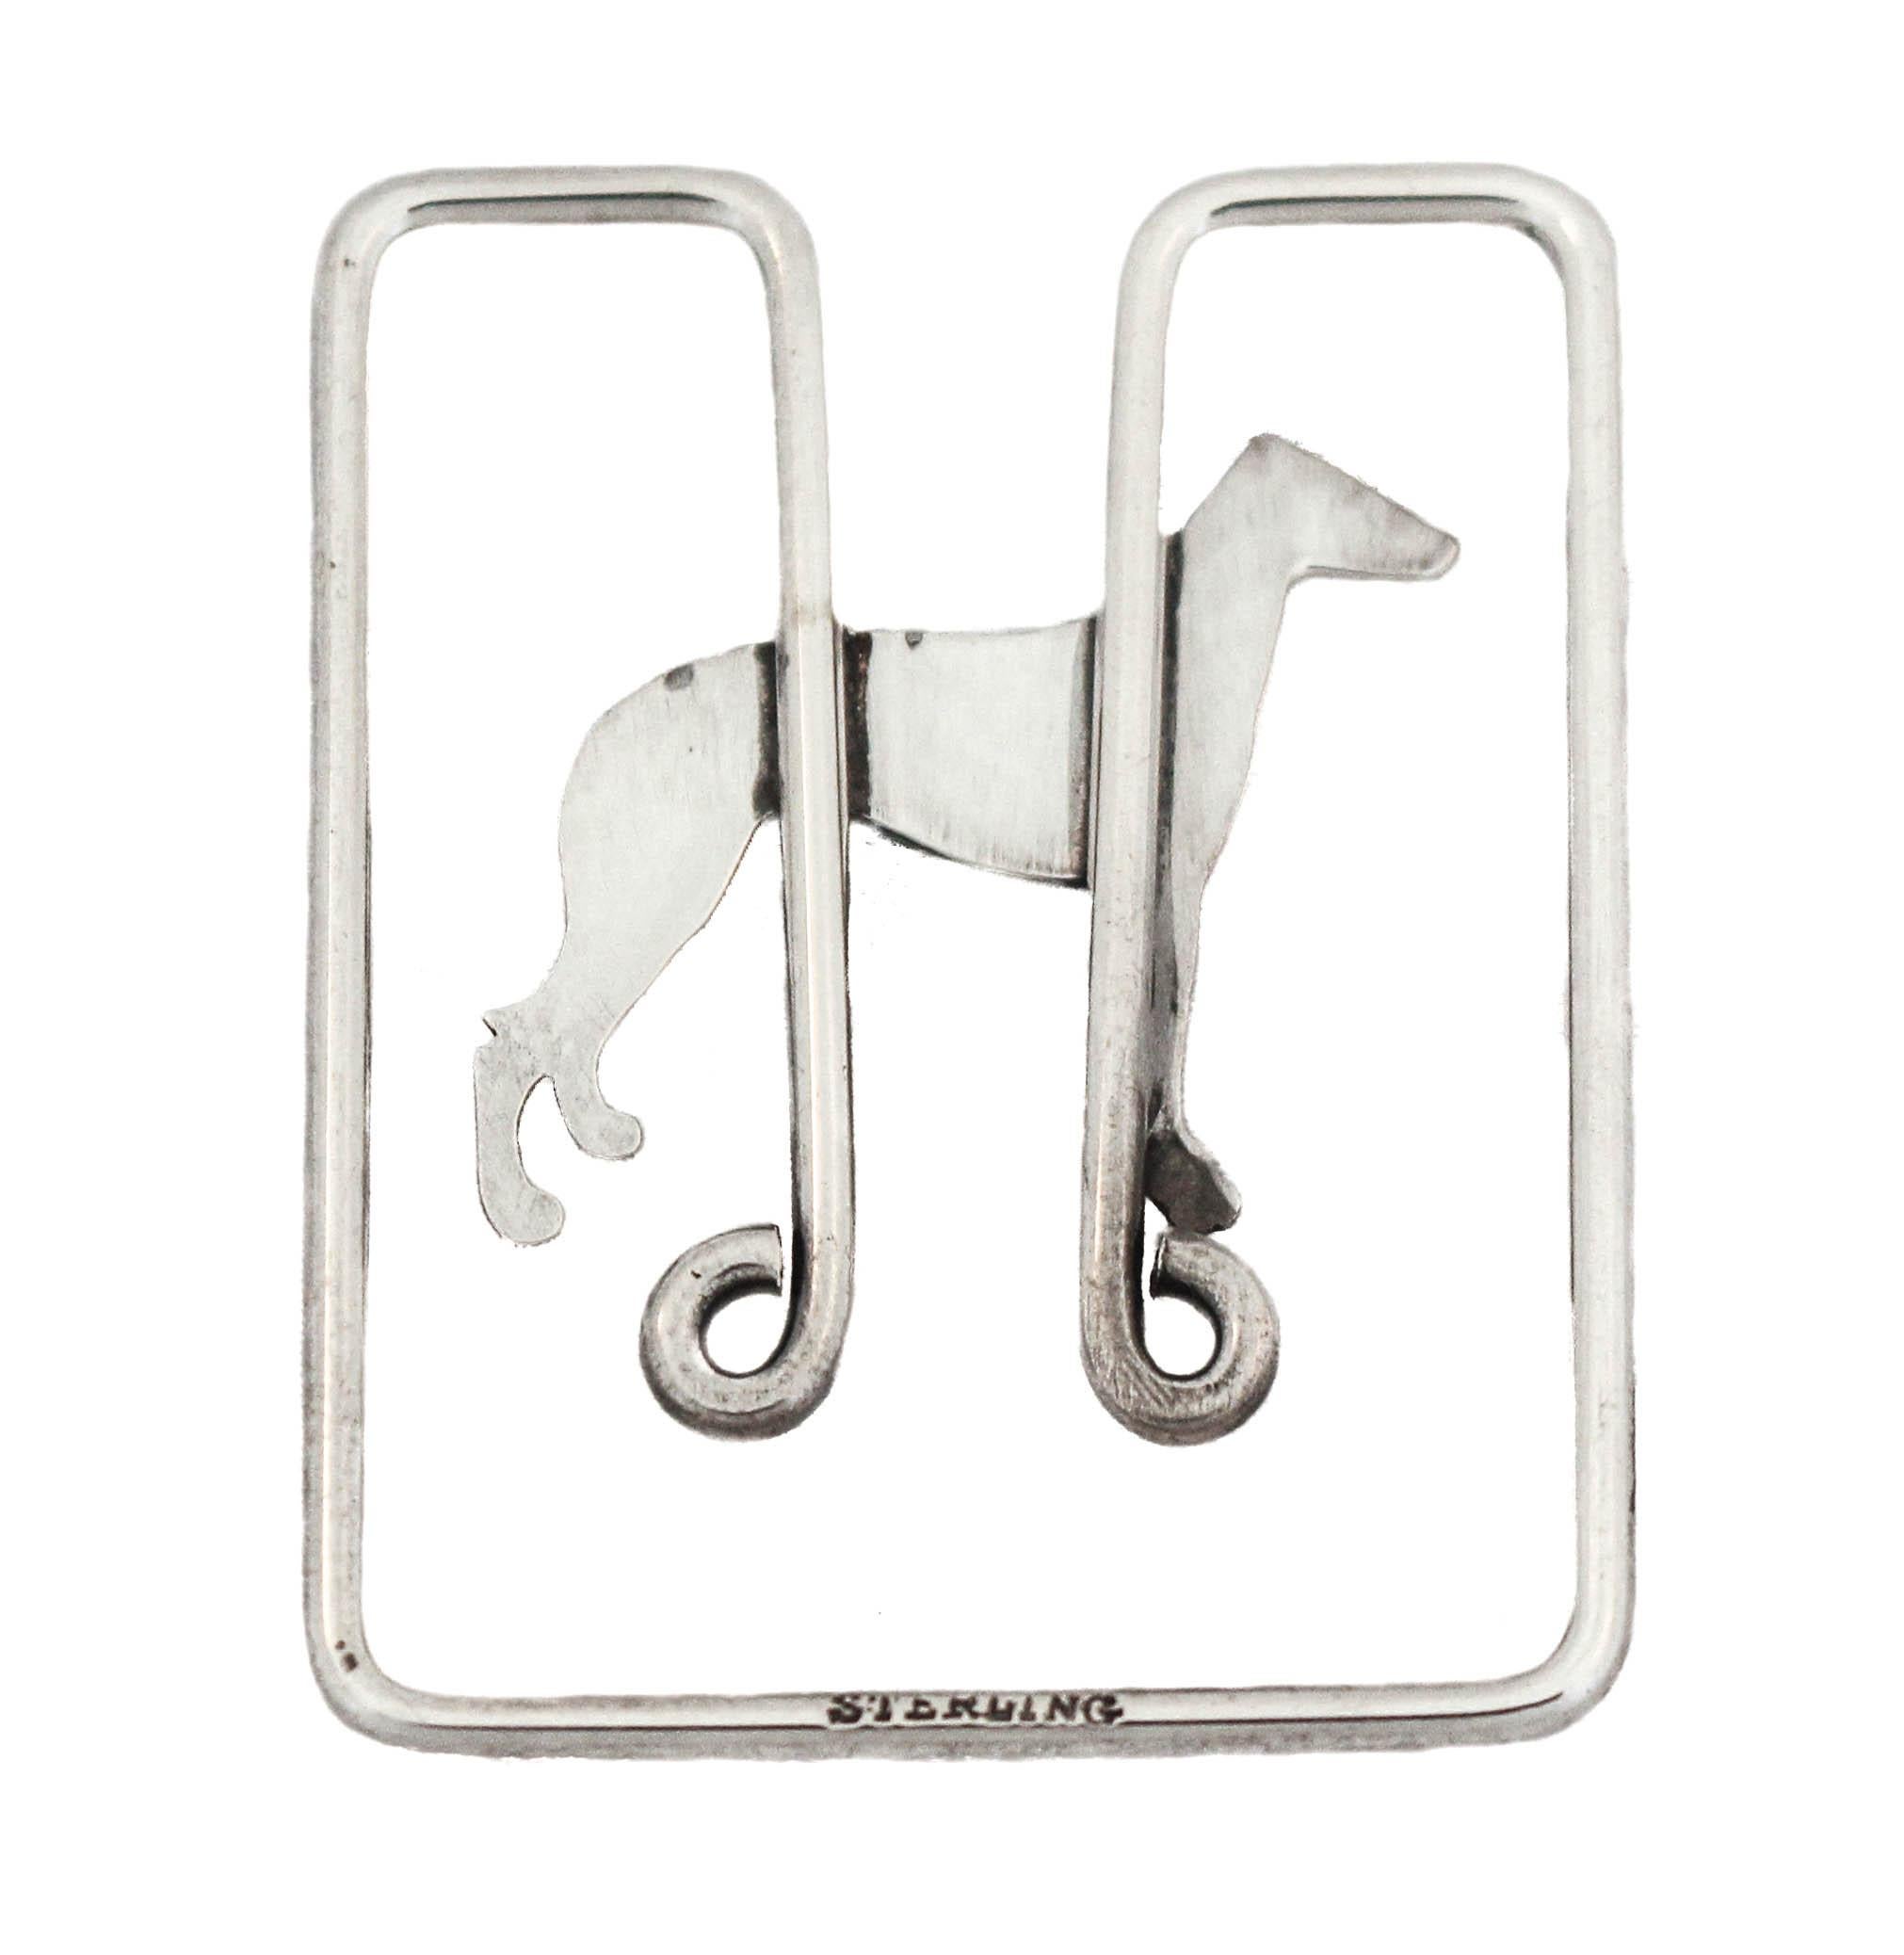 Attention all dog lovers, we are happy to offer you this sterling silver bookmark with a dog on its front side.  I’m not sure if it’s a greyhound, but it’s a lean dog and if you look closely you can even see the rib cage!  A great gift for anyone